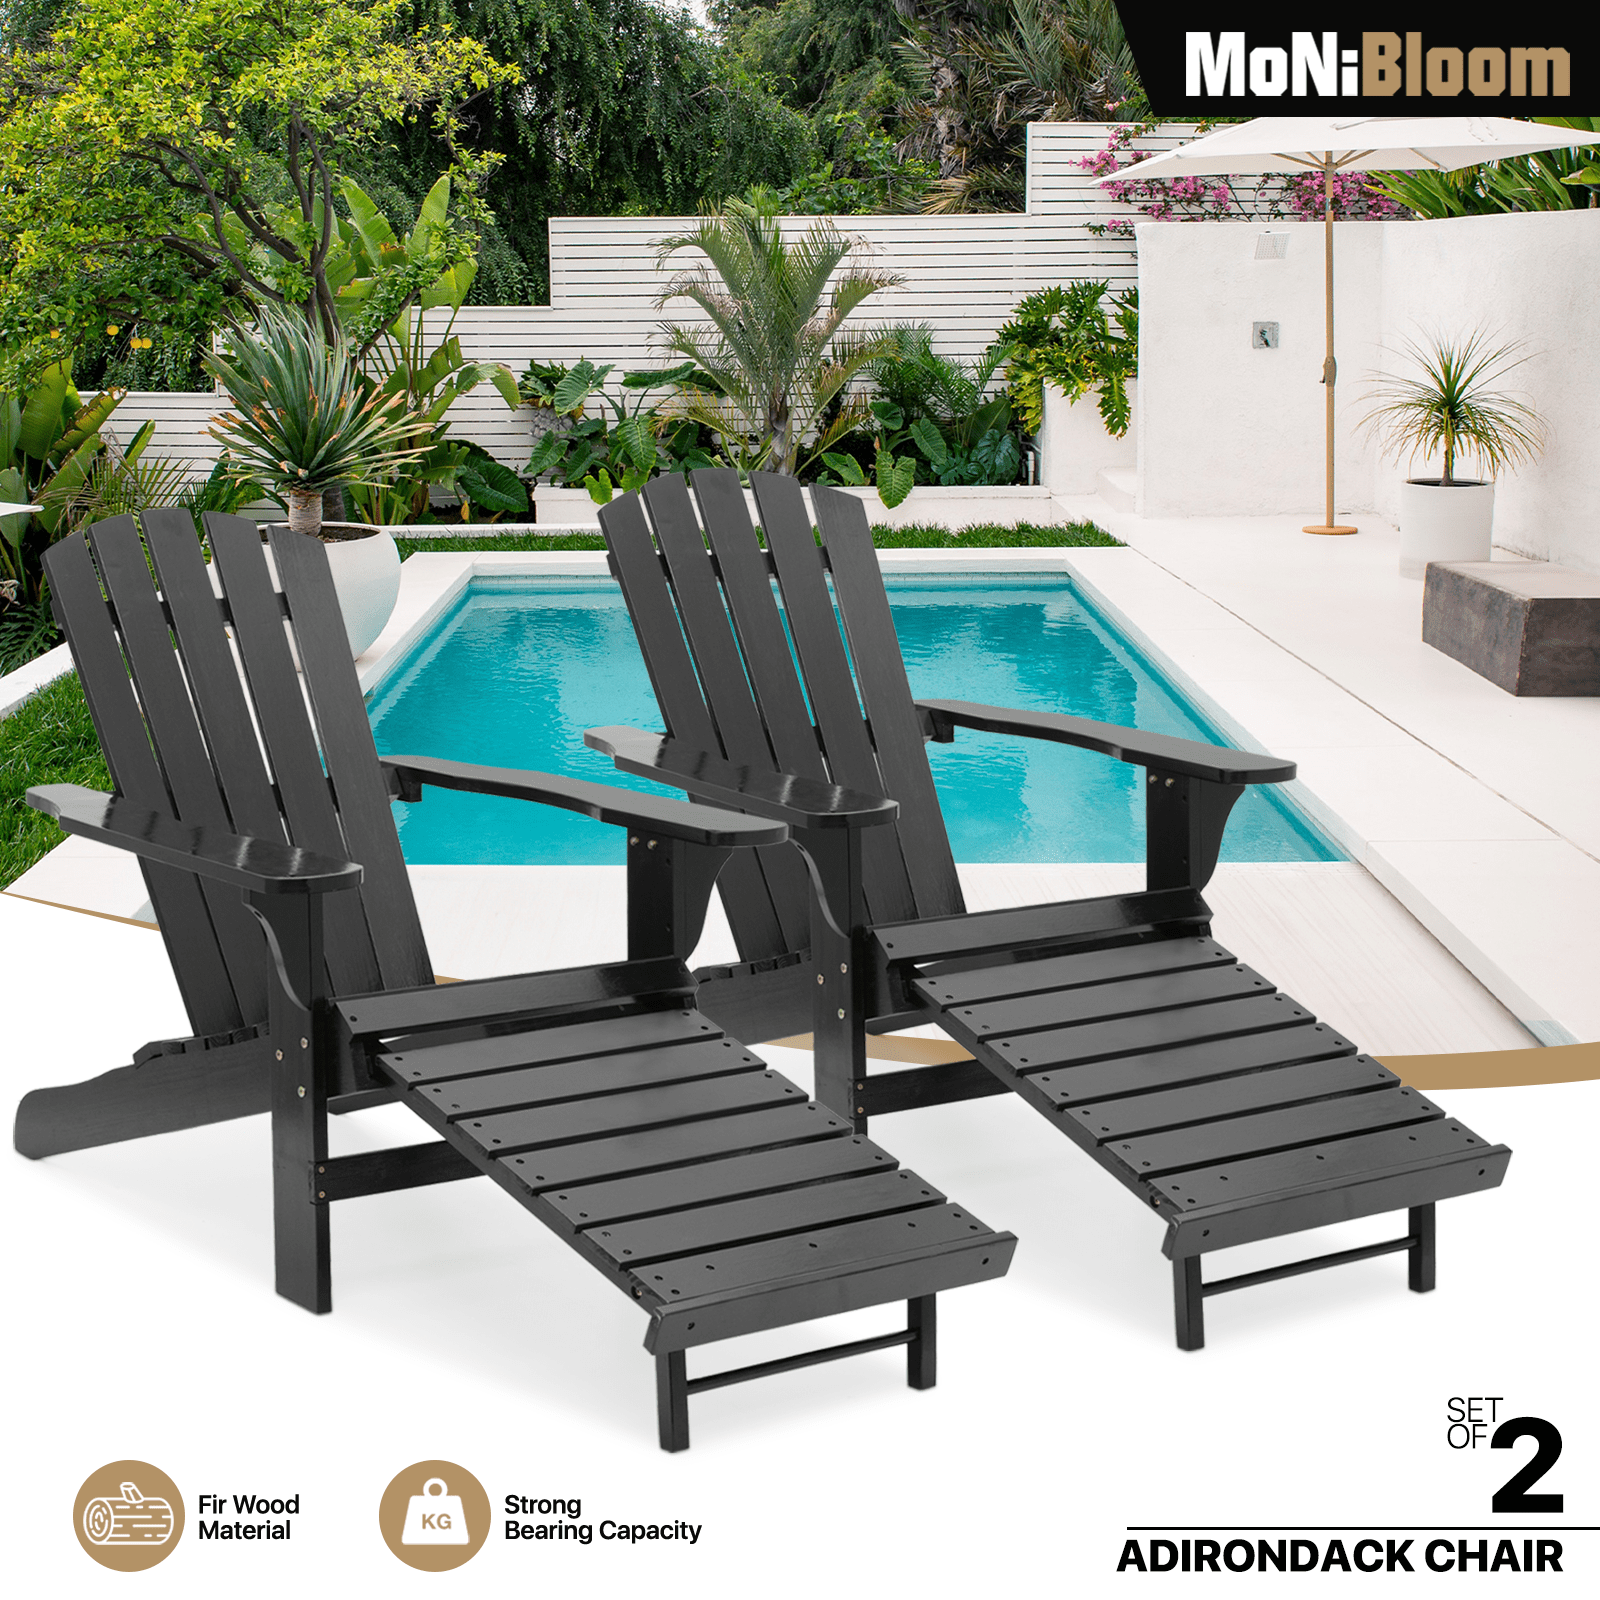 MoNiBloom Set of 2 Adirondack Chairs with Retractable Footrest 